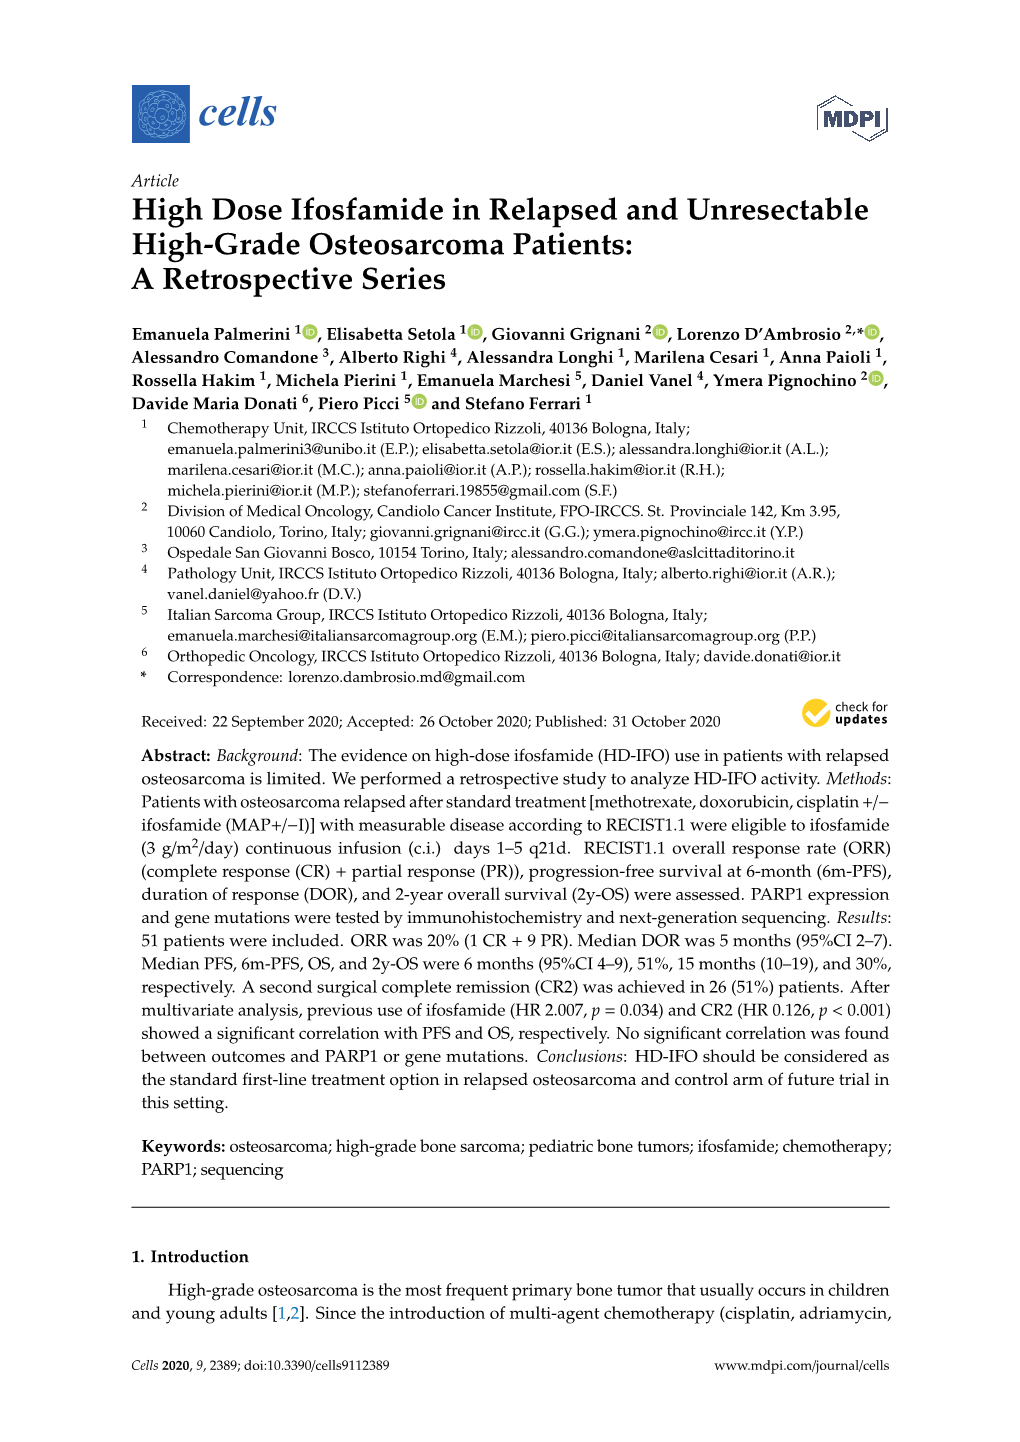 High Dose Ifosfamide in Relapsed and Unresectable High-Grade Osteosarcoma Patients: a Retrospective Series